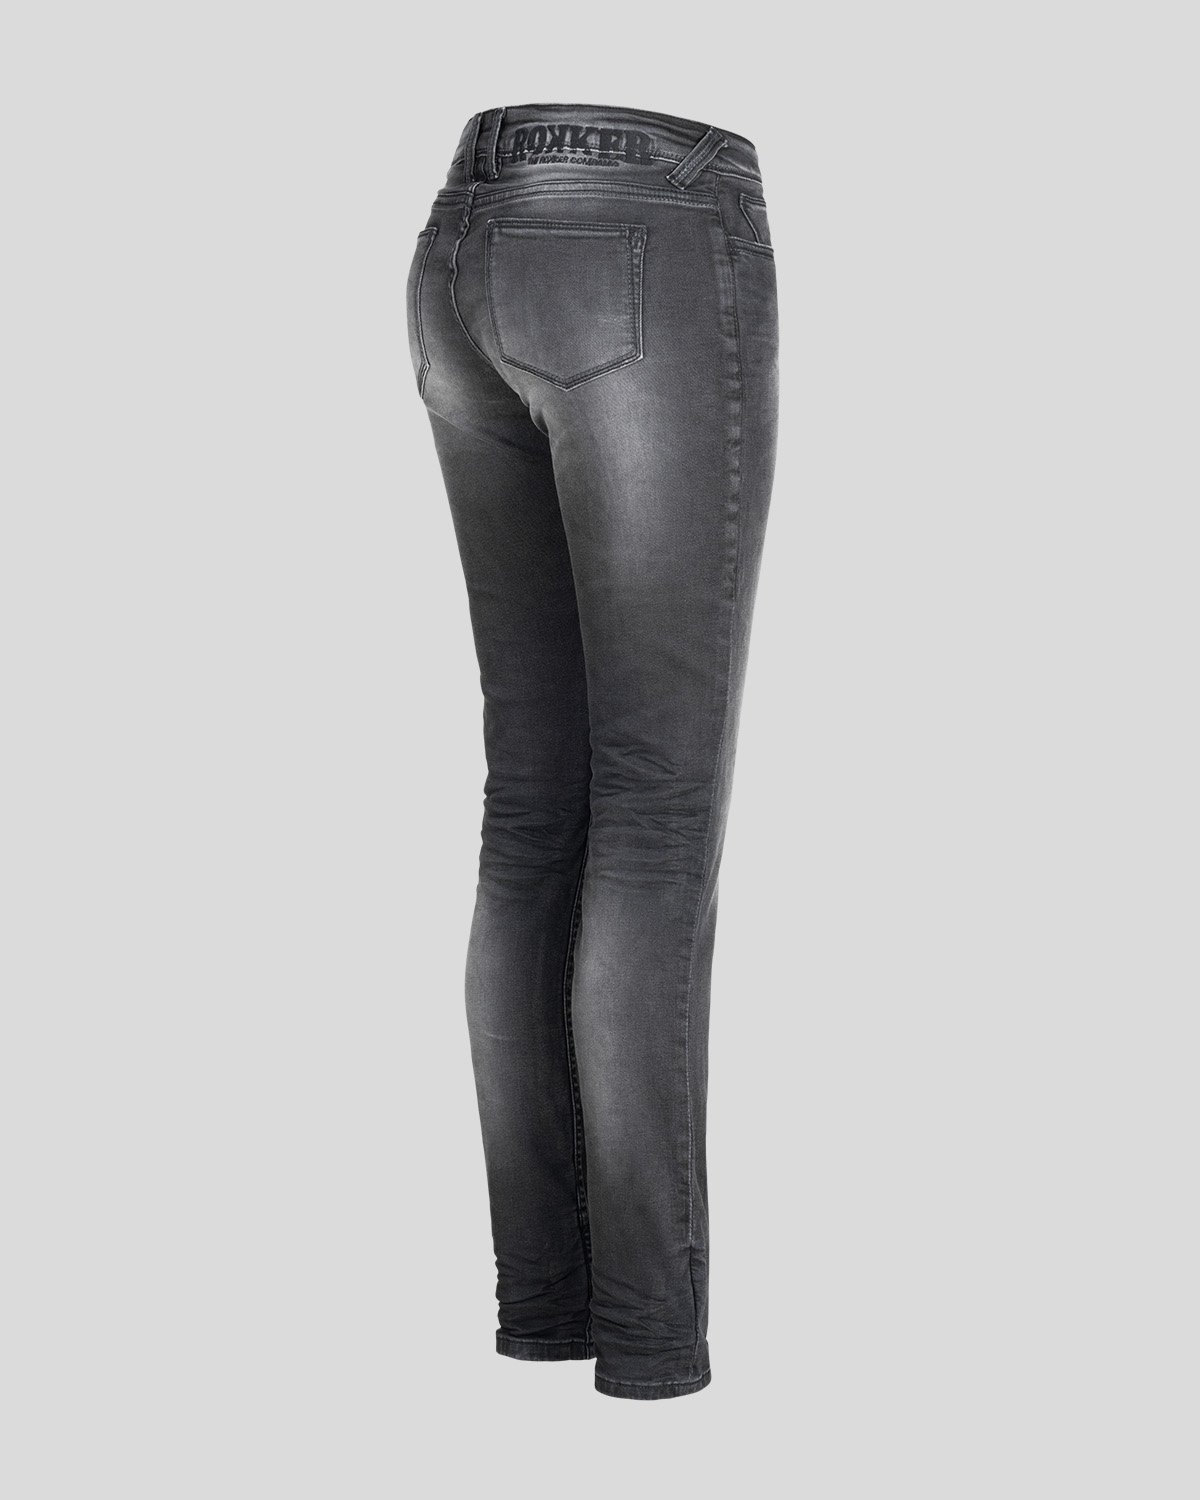 The Donna Black Jeans The Rokker Company 